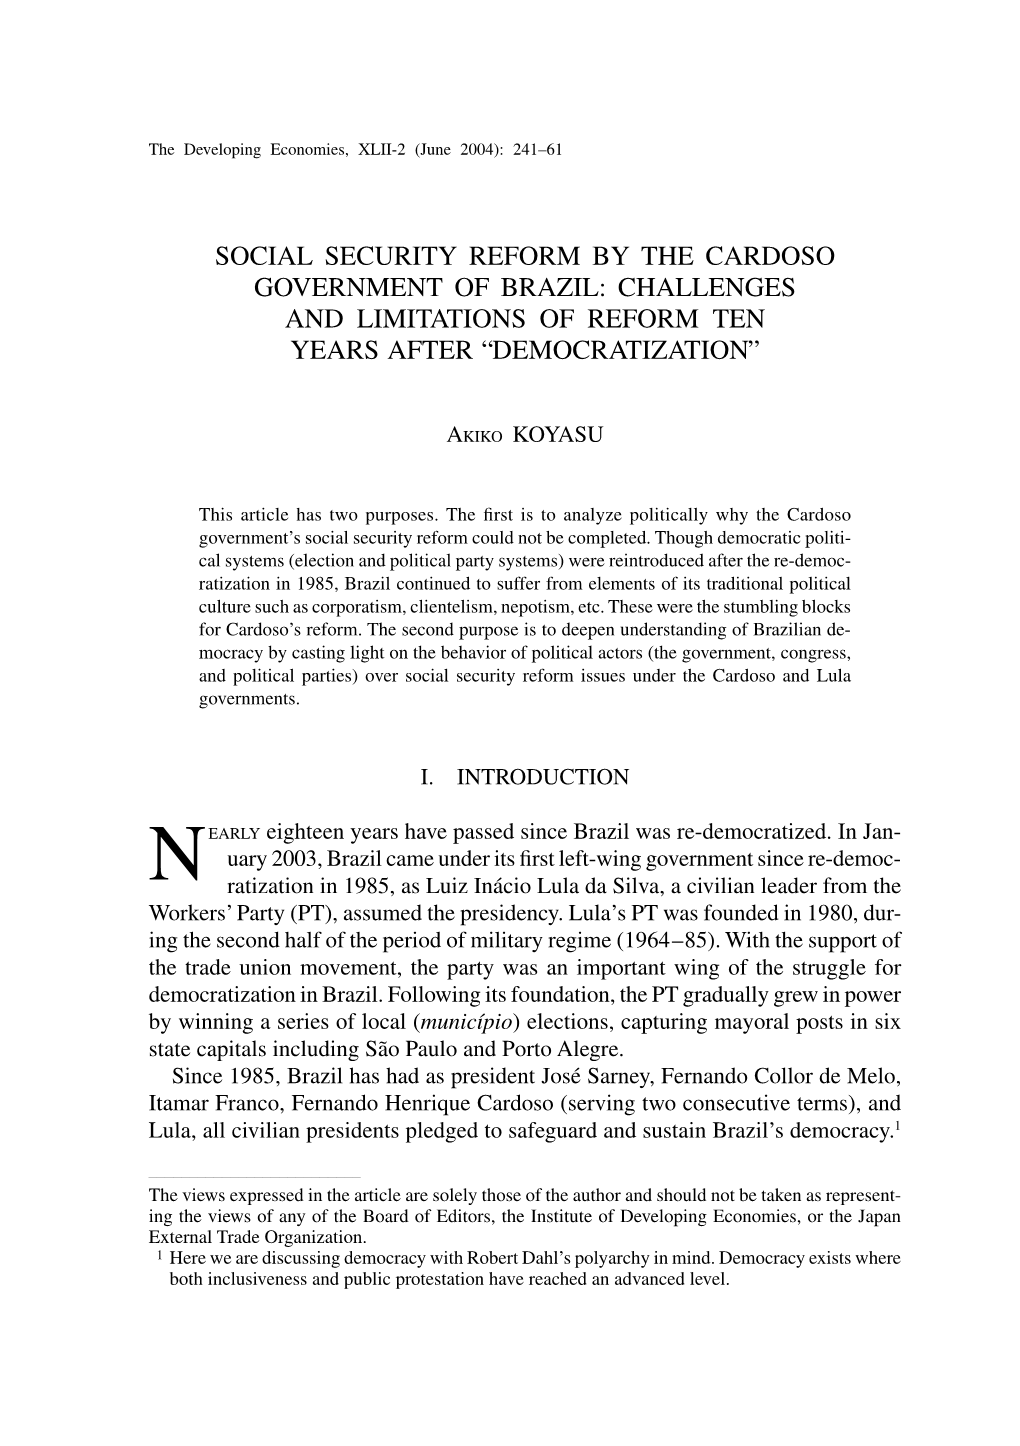 Social Security Reform by the Cardoso Government of Brazil: Challenges and Limitations of Reform Ten Years After “Democratization”